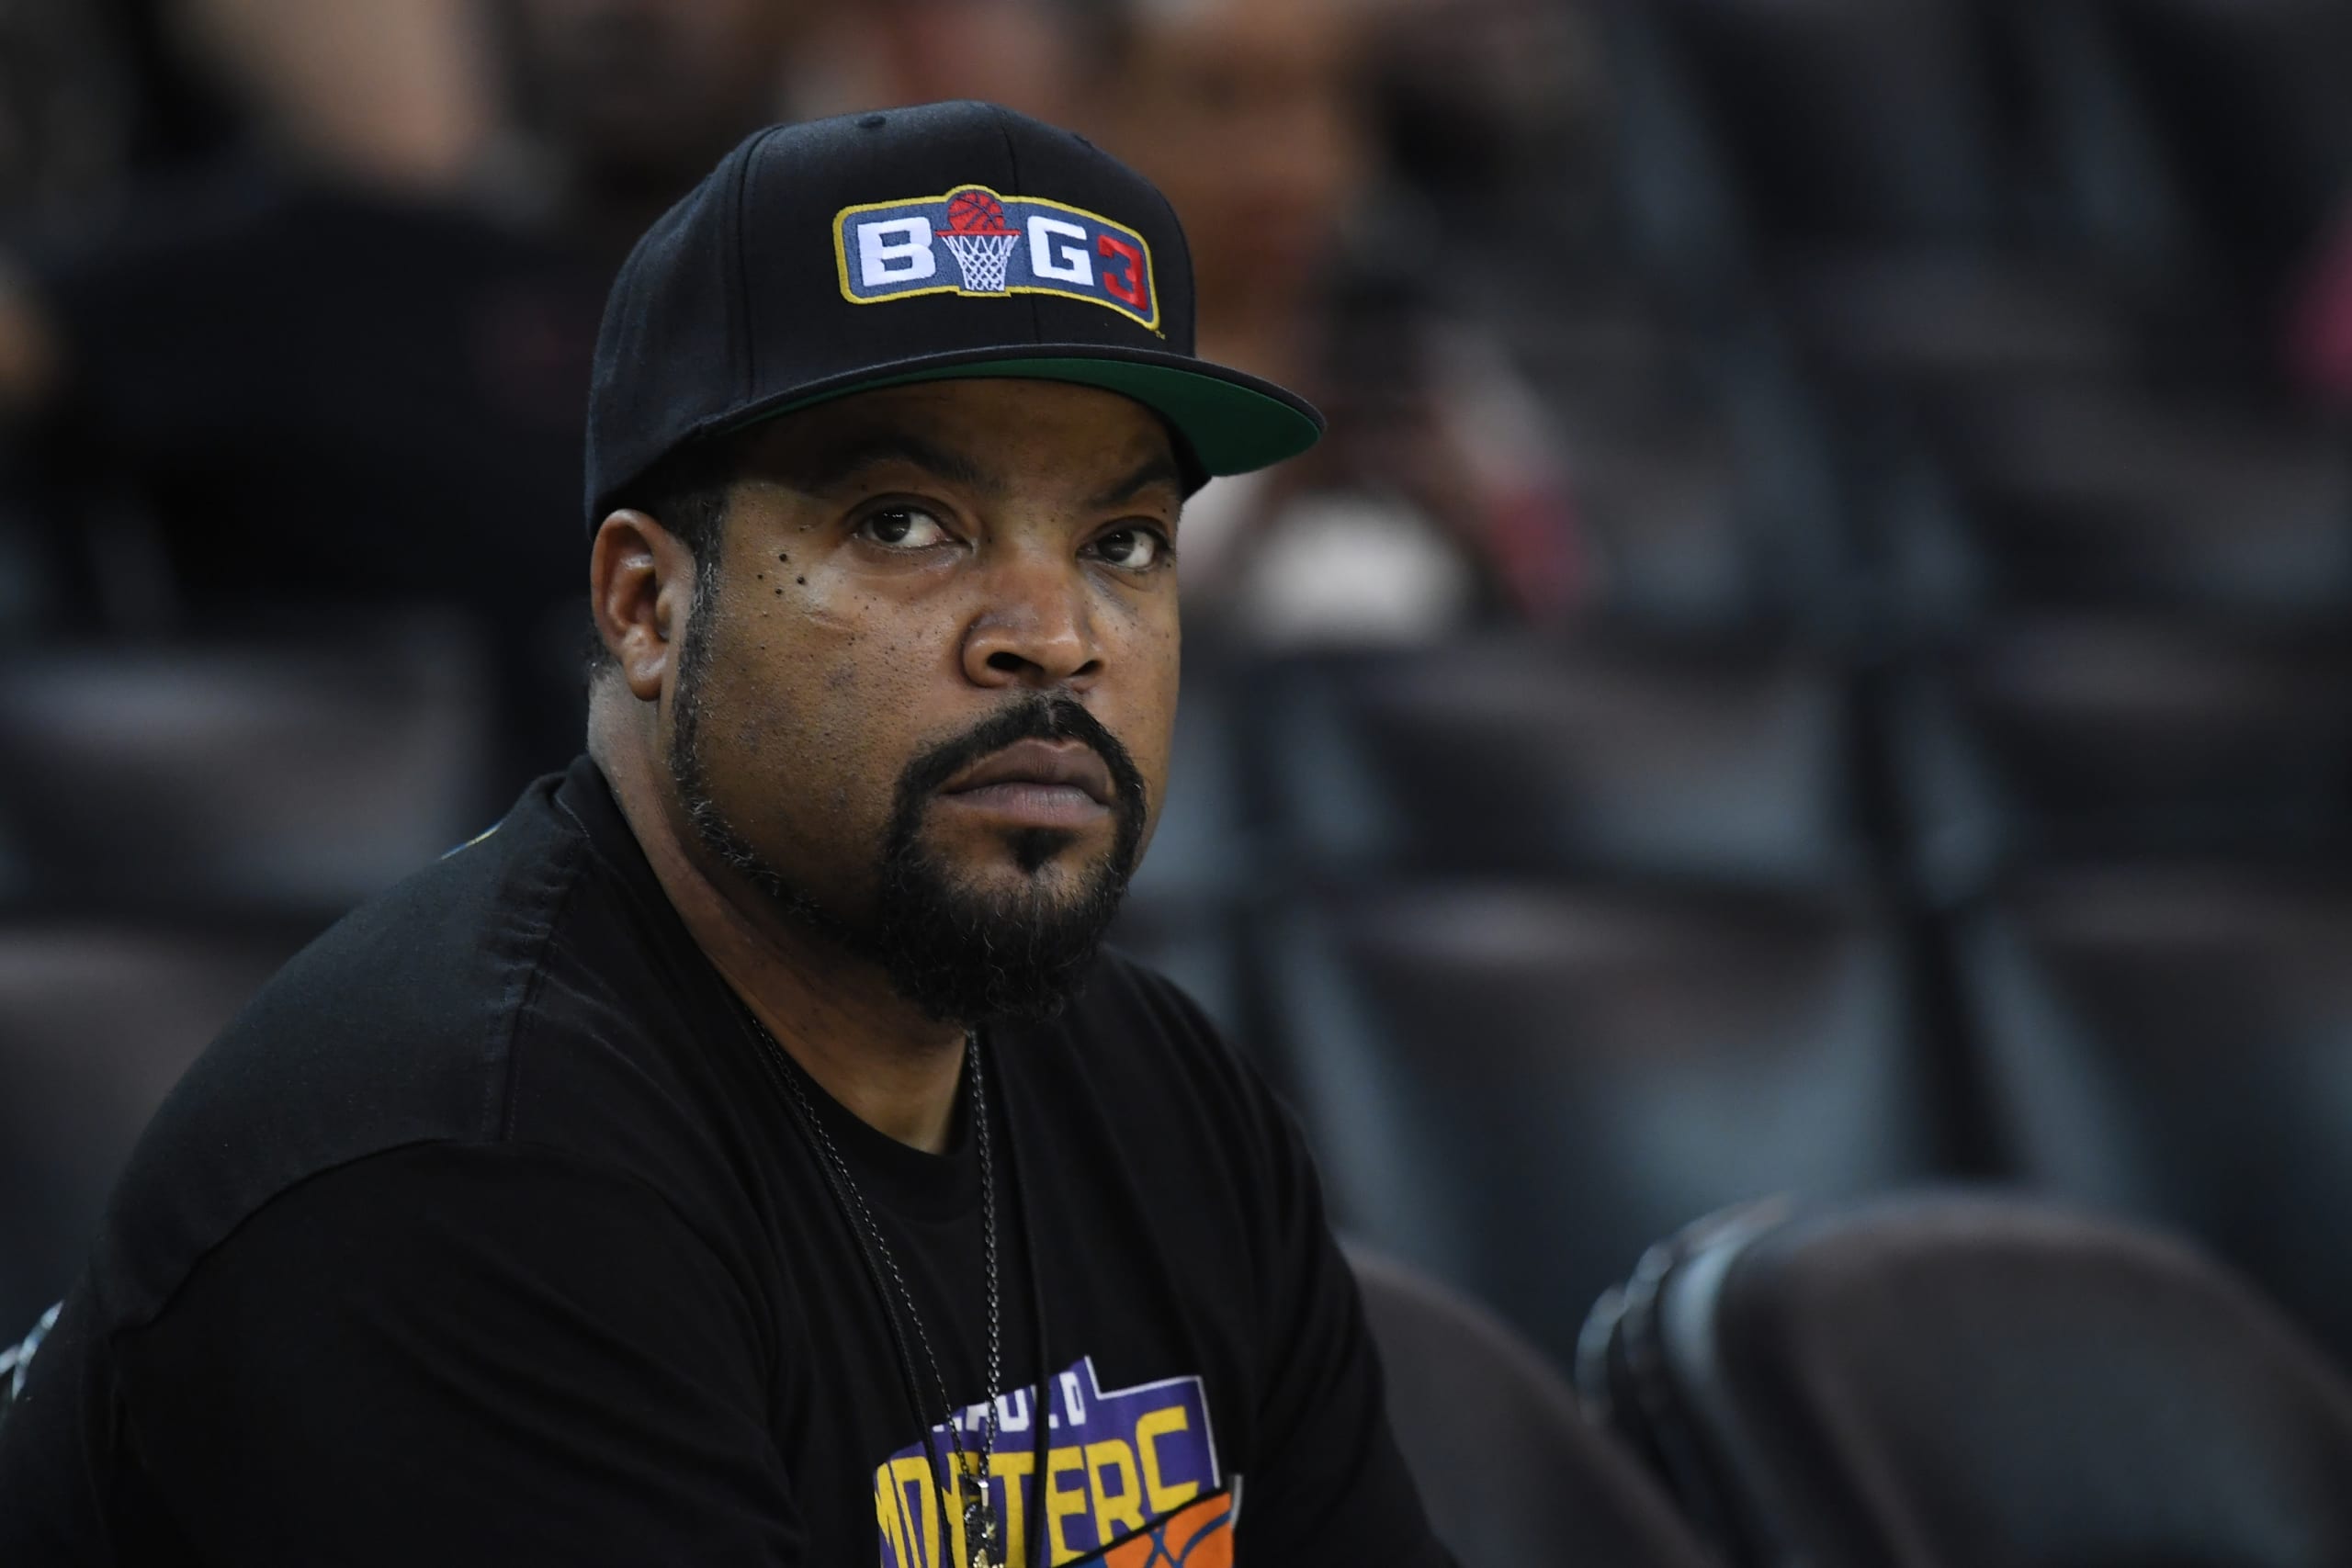 Ice Cube's Big3 must prove relevance and interest level regardless